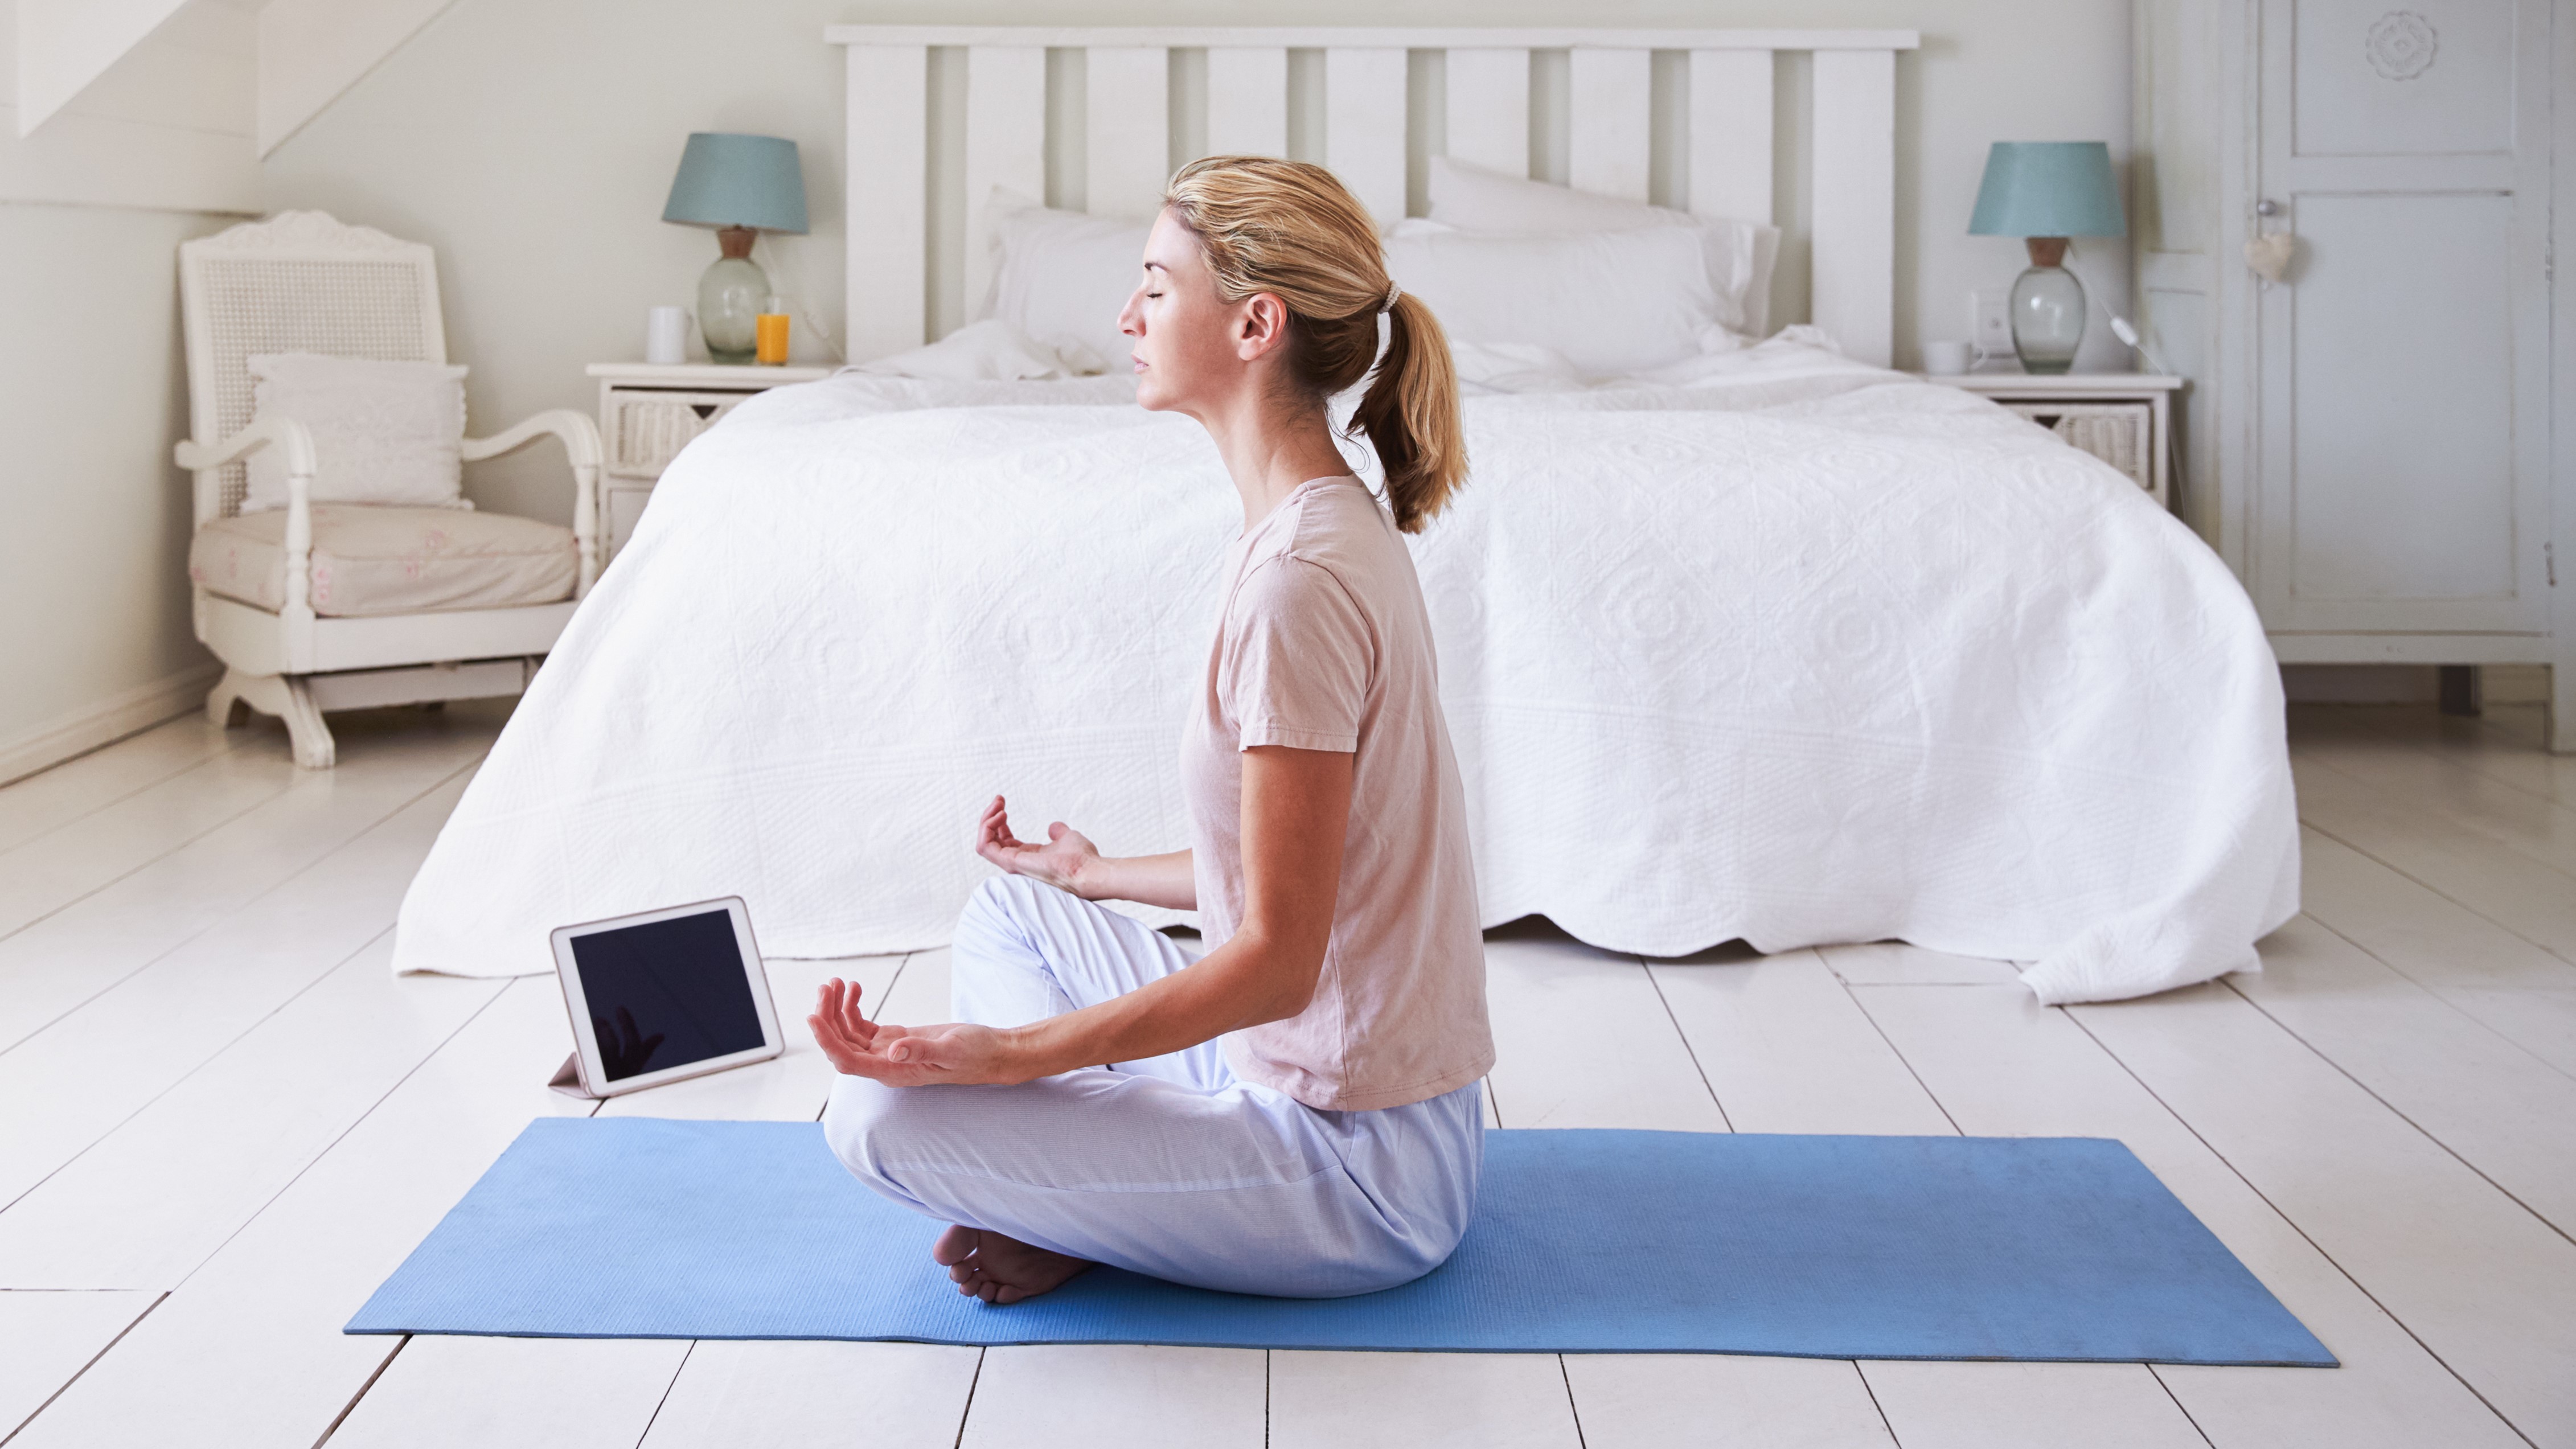 A woman uses a meditation app while sitting on a blue yoga mat in front of her white bed